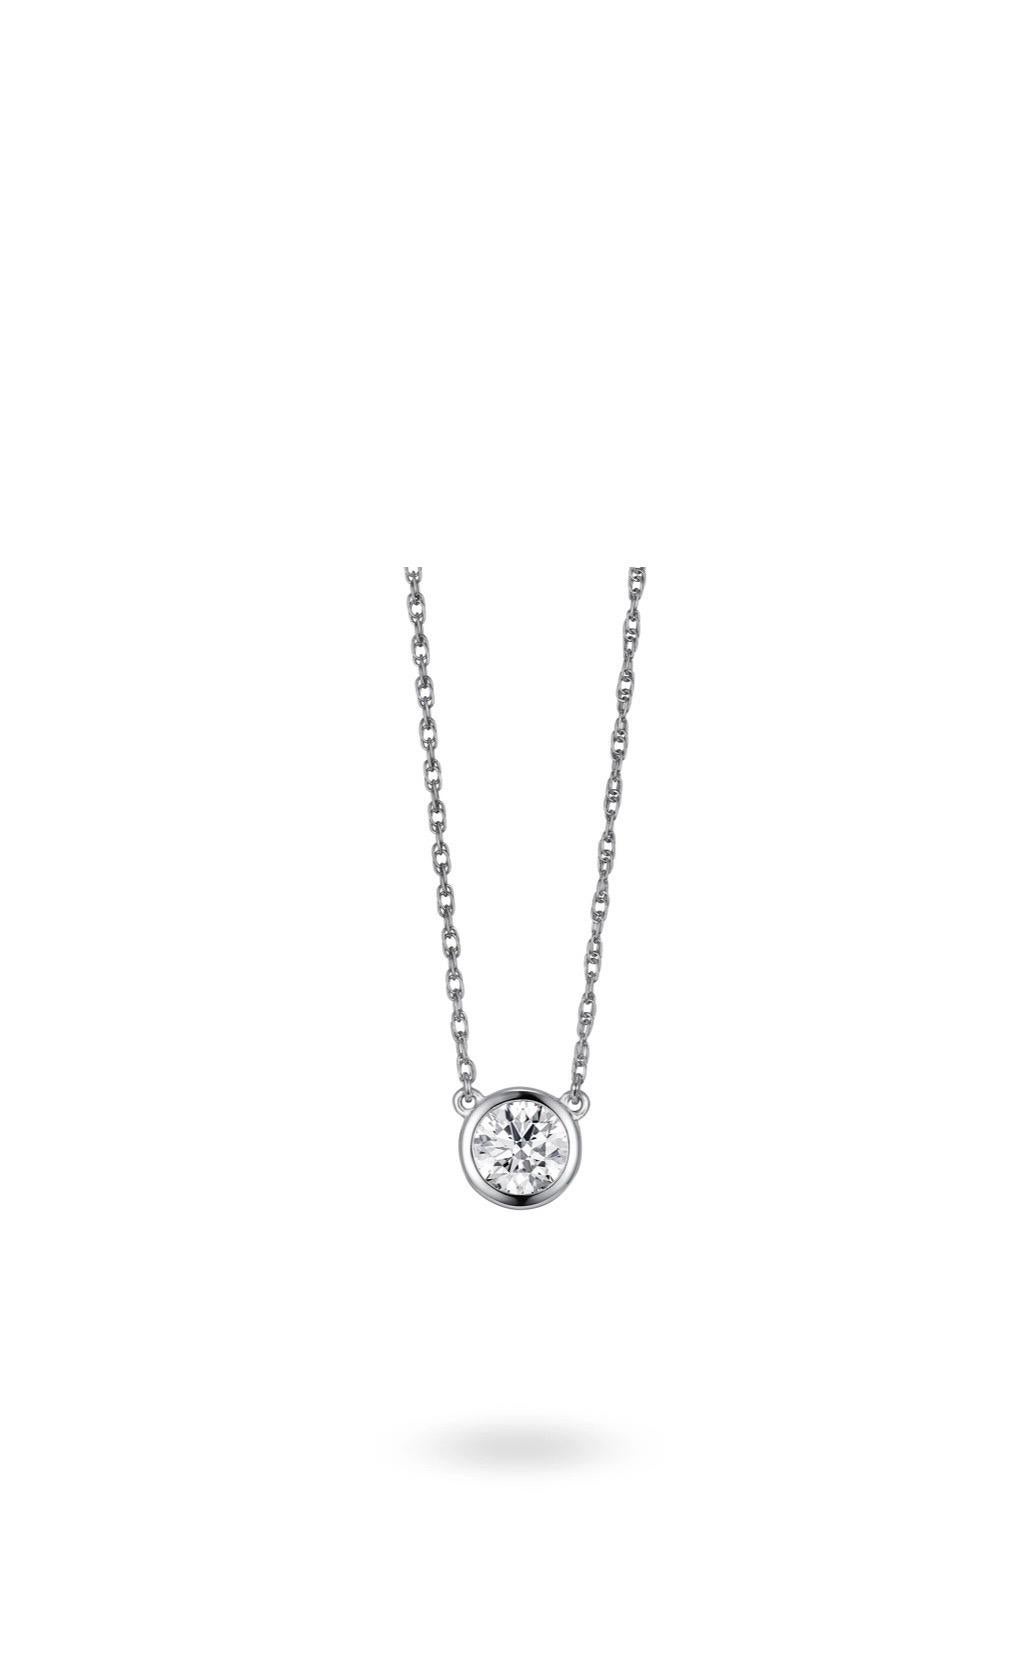 Beautiful Diamond pendant with single  round brilliant cut diamond. Absolutely stunning shine and  so perfect for everyday wear.
Gemstone: Diamond
Stone Shape: Round Brilliant
Carat Weight: 0.19 Ct
18 Karat gold weight 2.0 gm
A single hand-polished